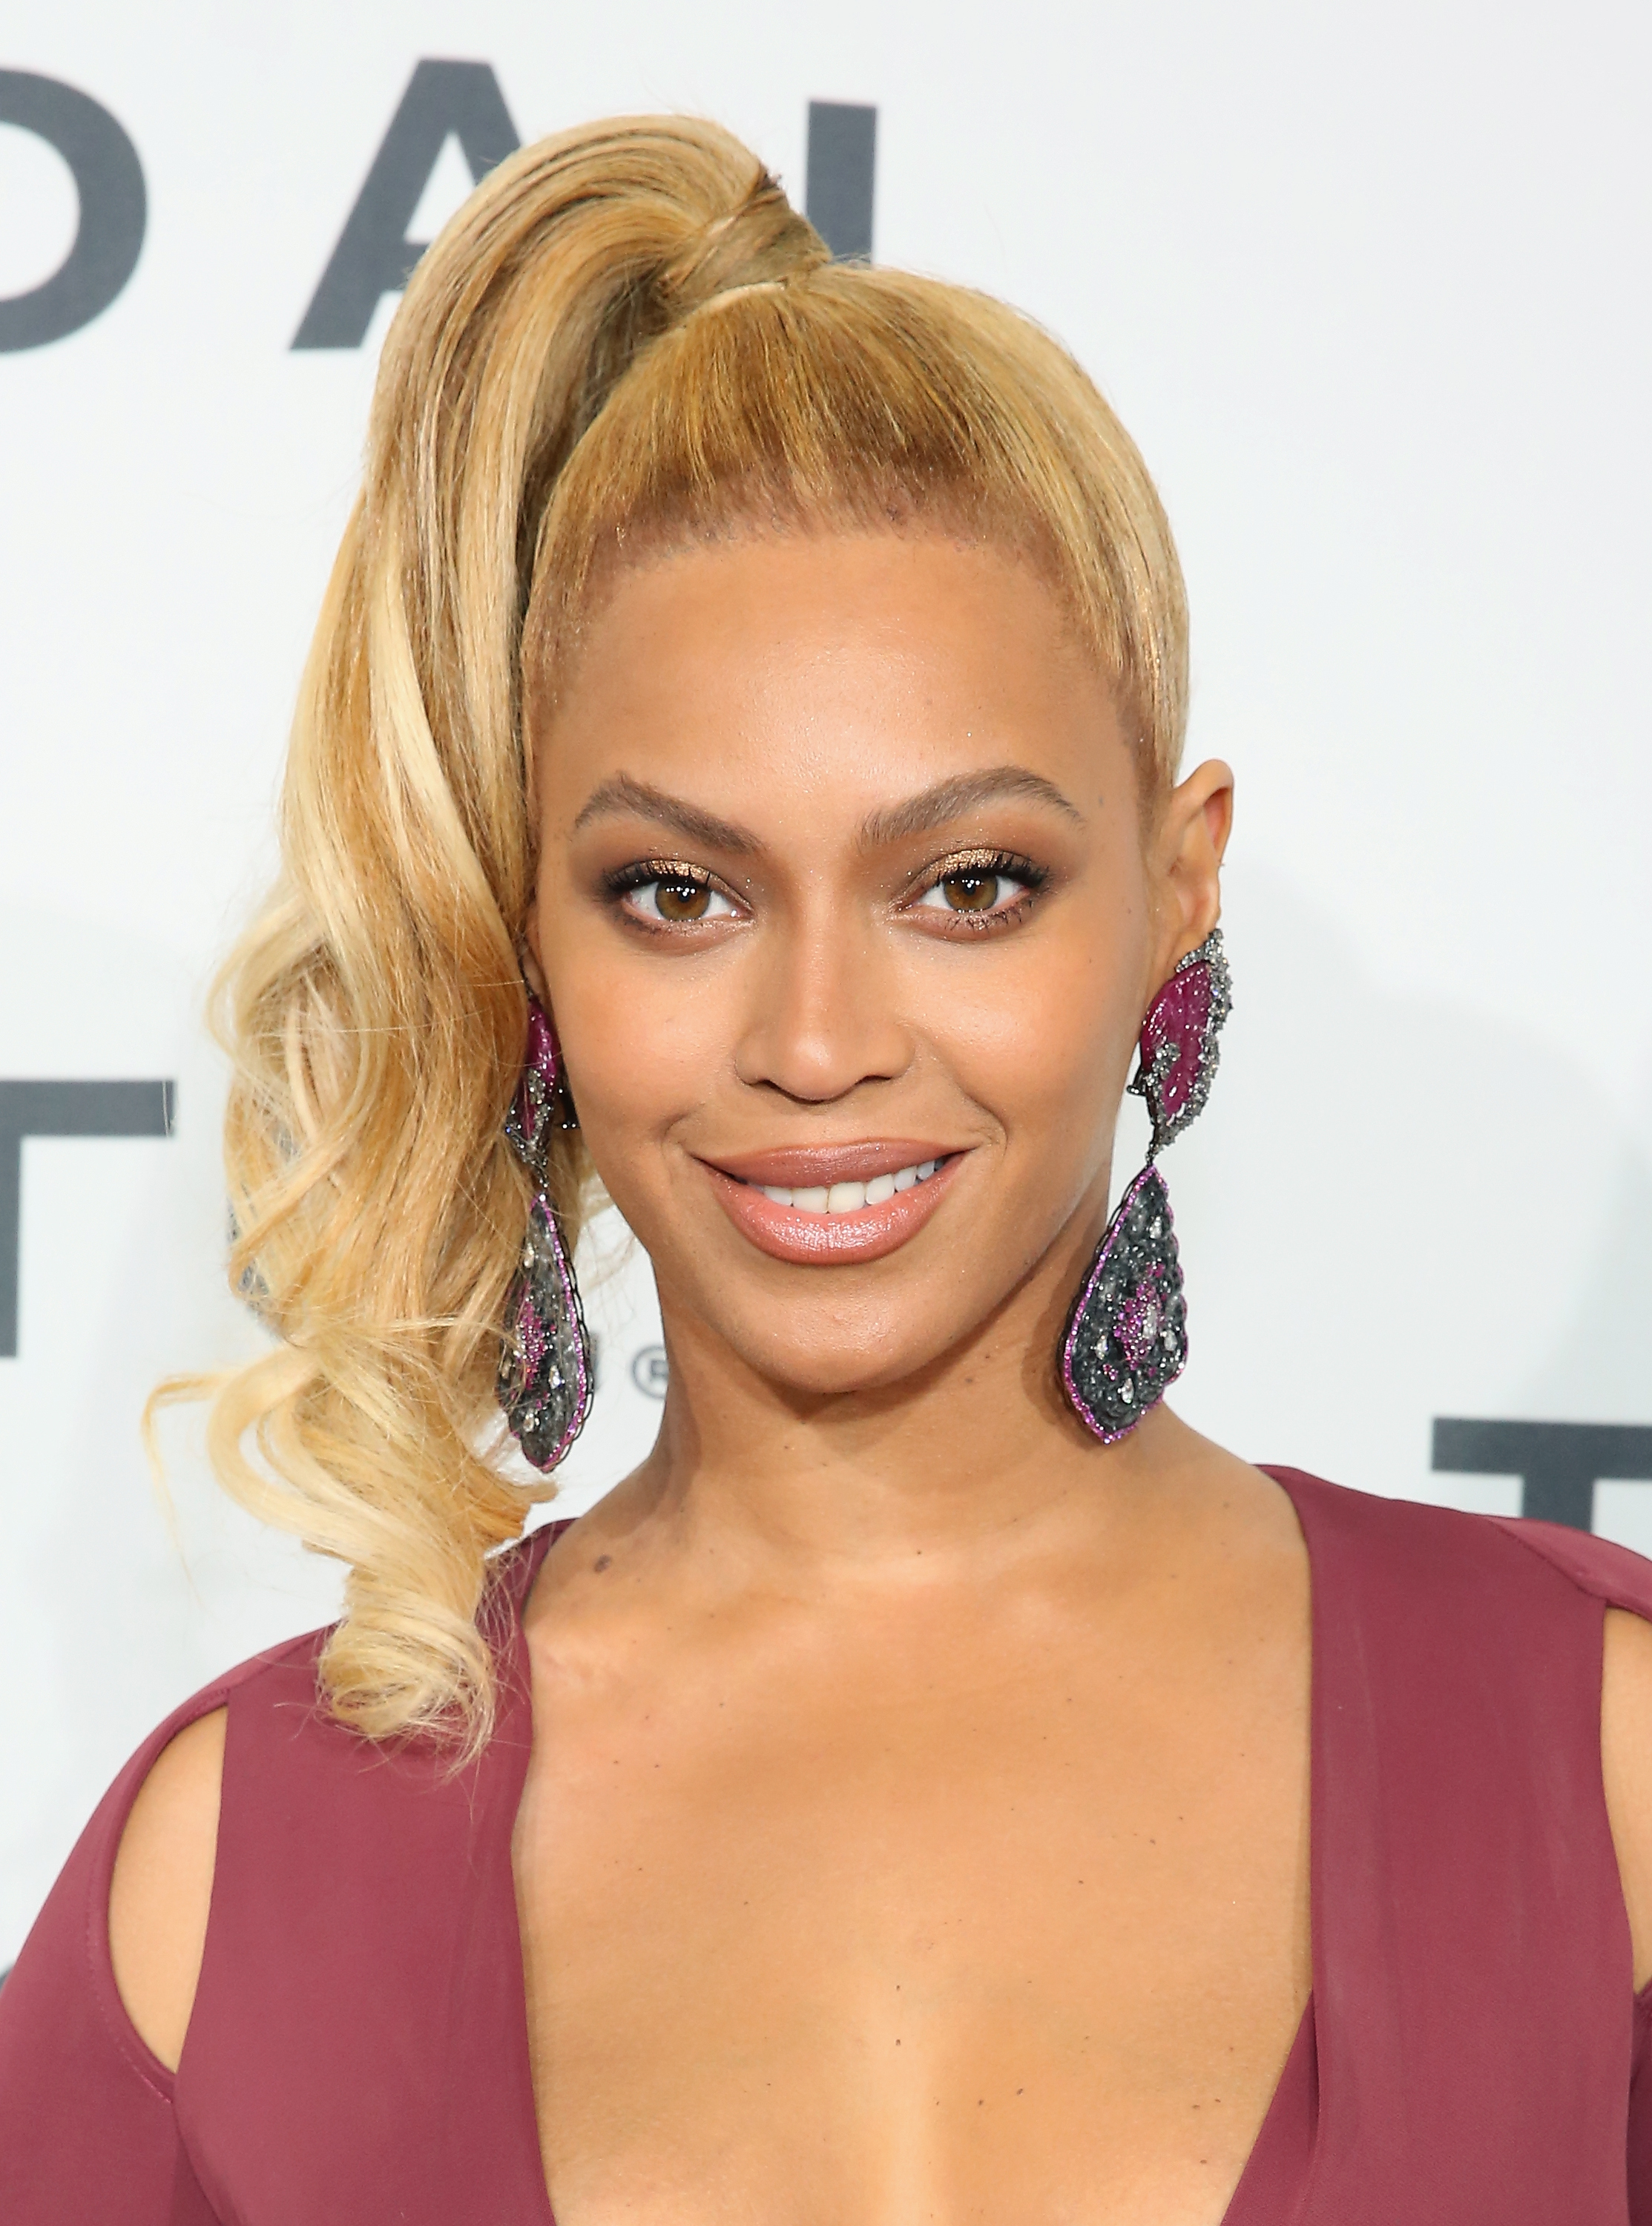 Beyoncé attends TIDAL X: 1020 in the Brooklyn borough of New York City on Oct. 20, 2015.